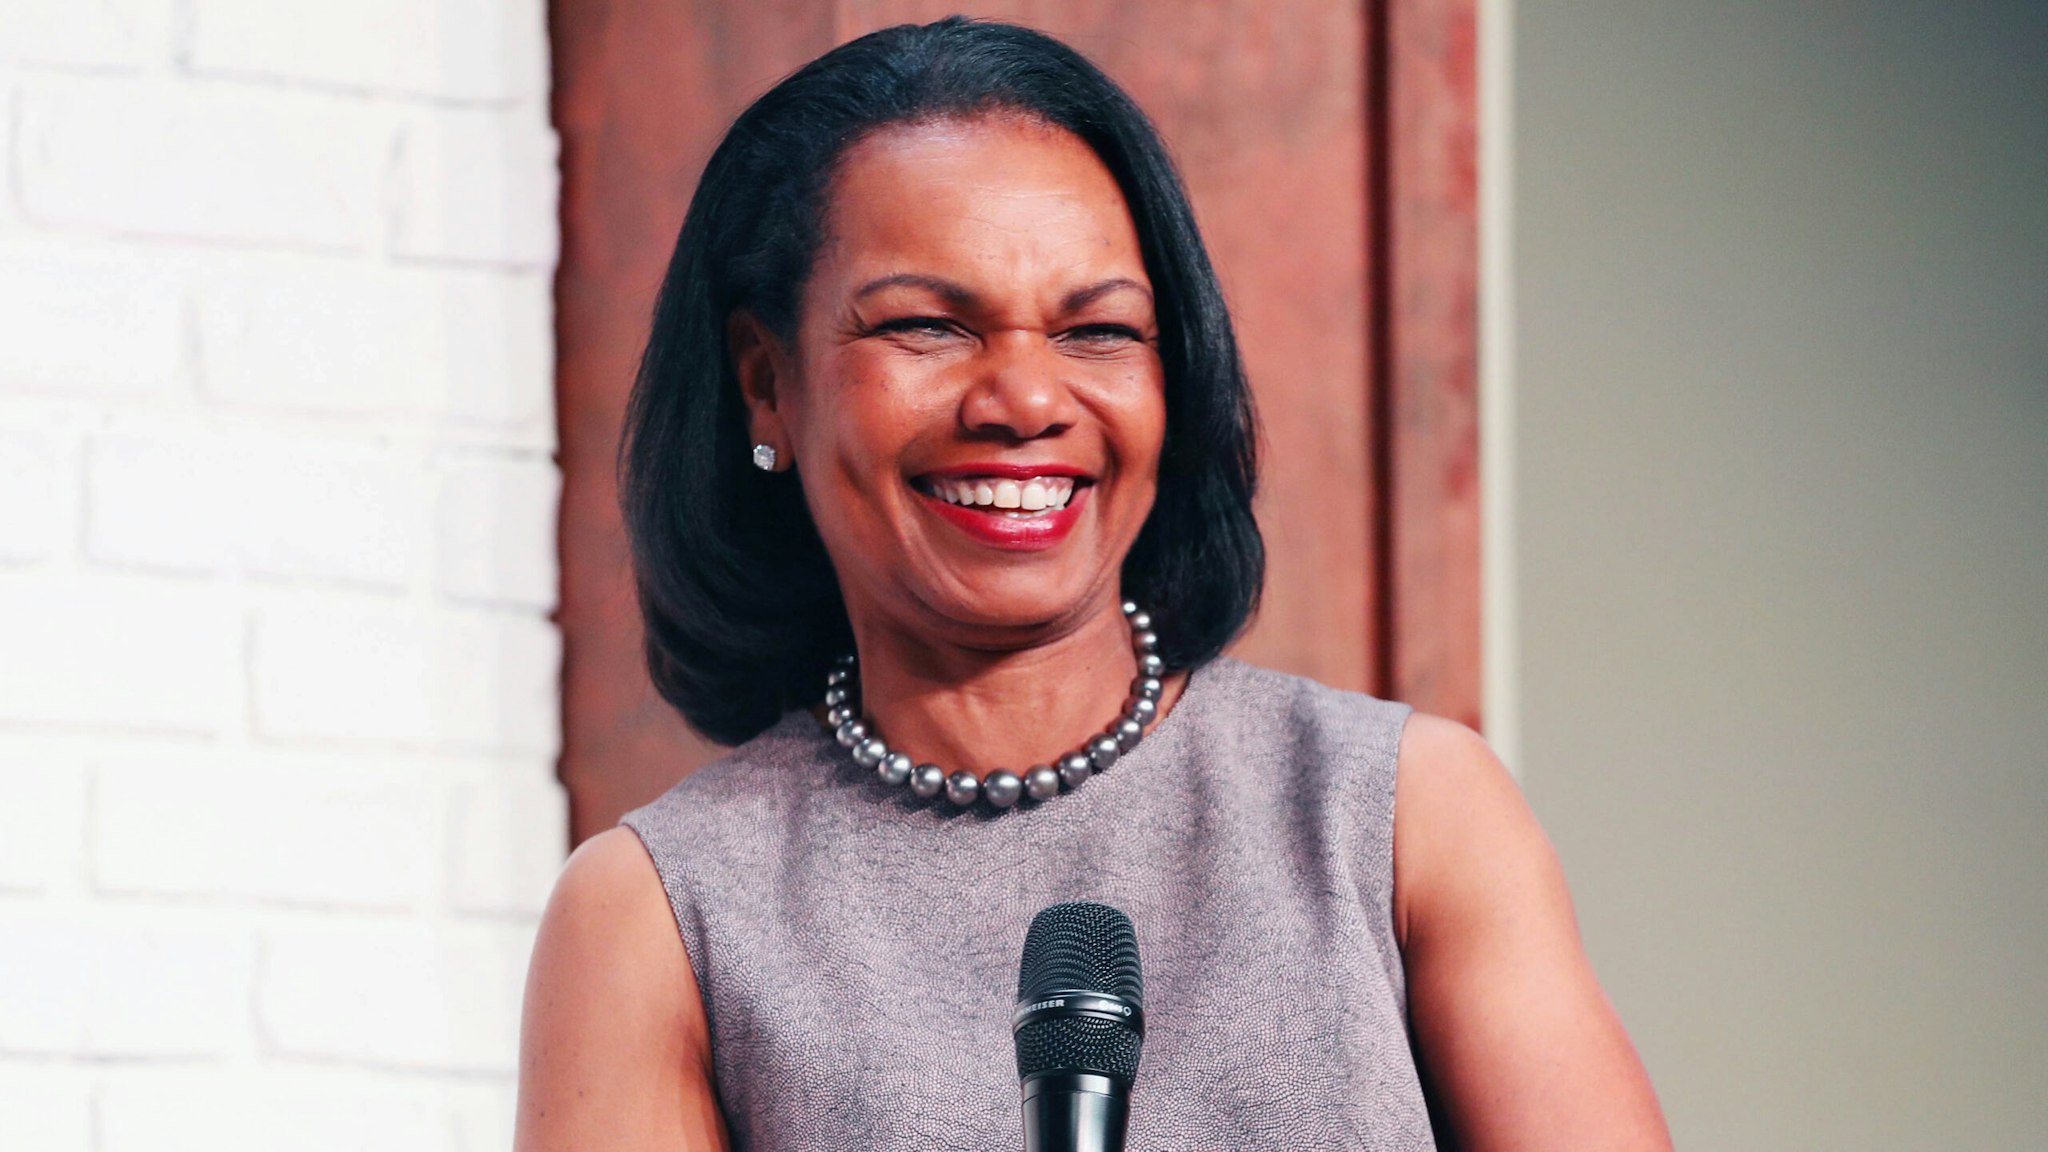 OLYMPIA FIELDS, IL - JUNE 28: Dr. Condoleezza Rice chats with guests at the KPMG Women's Leadership Summit prior to the start of the 2017 KPMG Women's PGA Championship at Olympia Fields Country Club on June 28, 2017 in Olympia Fields, Illinois.